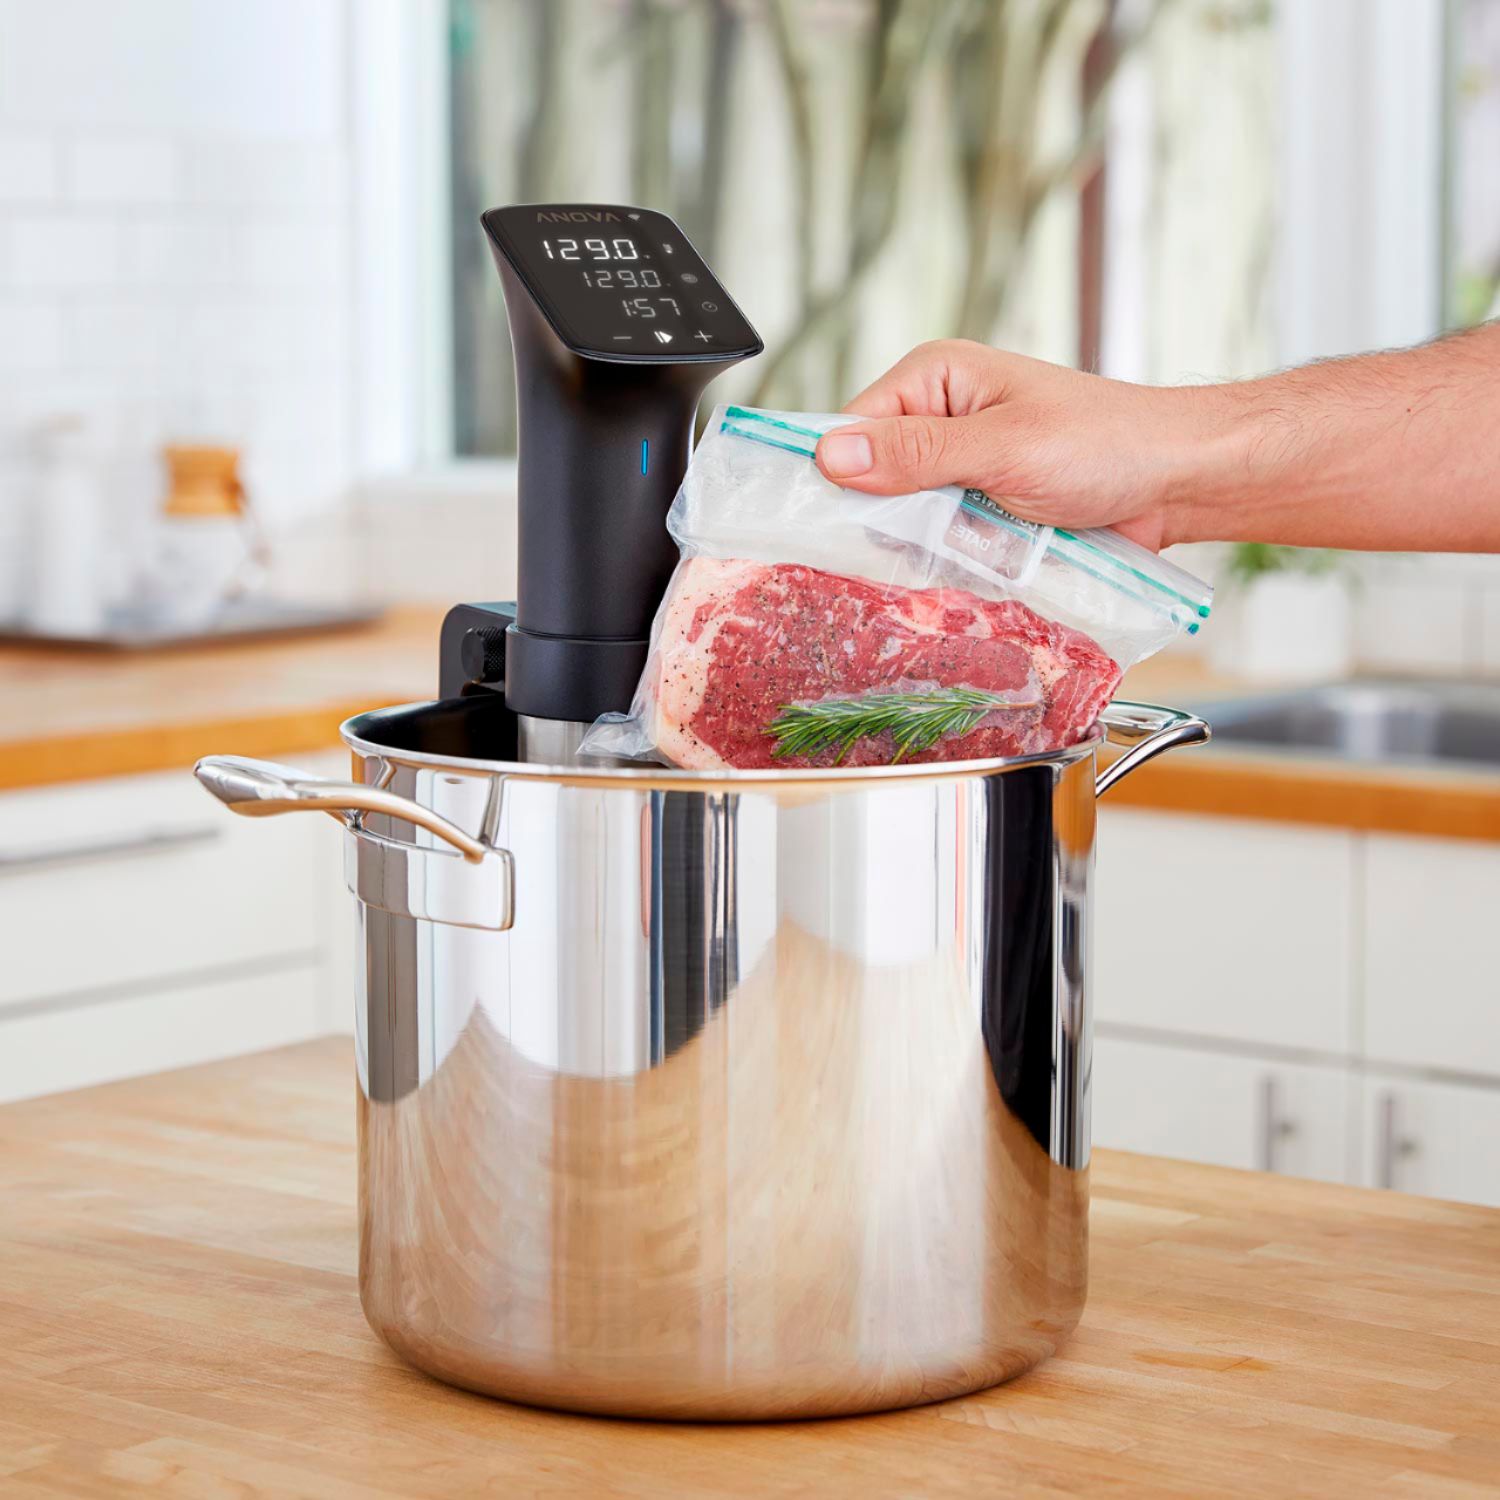  Breville the Joule Turbo Sous Vide Machine, Sous Vide Cooker,  Immersion Circulators, BSV600PSS, Polished Stainless Steel : Home & Kitchen